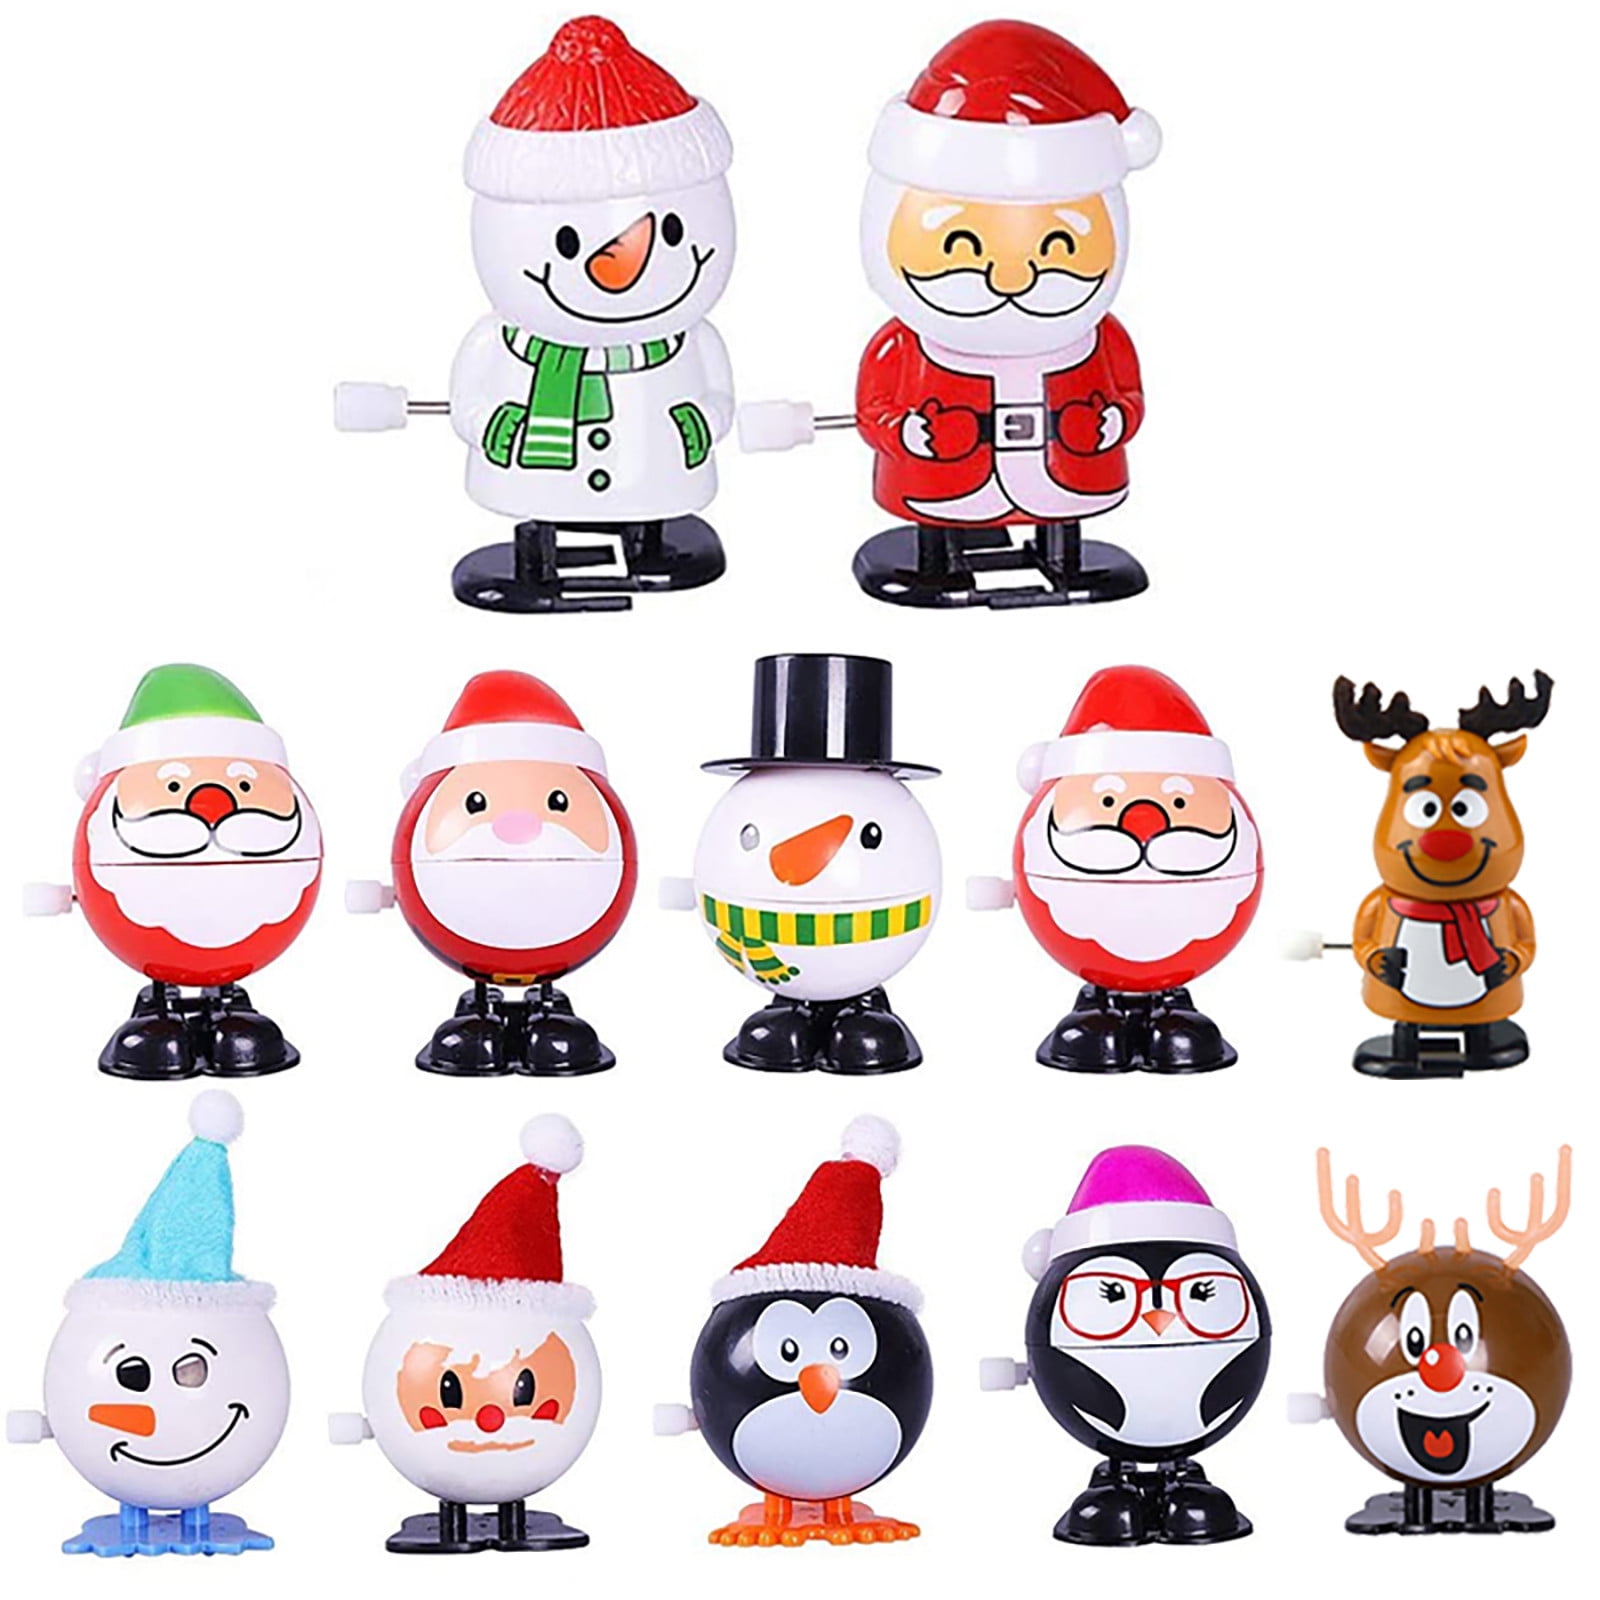 THE TWIDDLERS - 8 Christmas Wind Up Toys in Assorted Xmas Designs